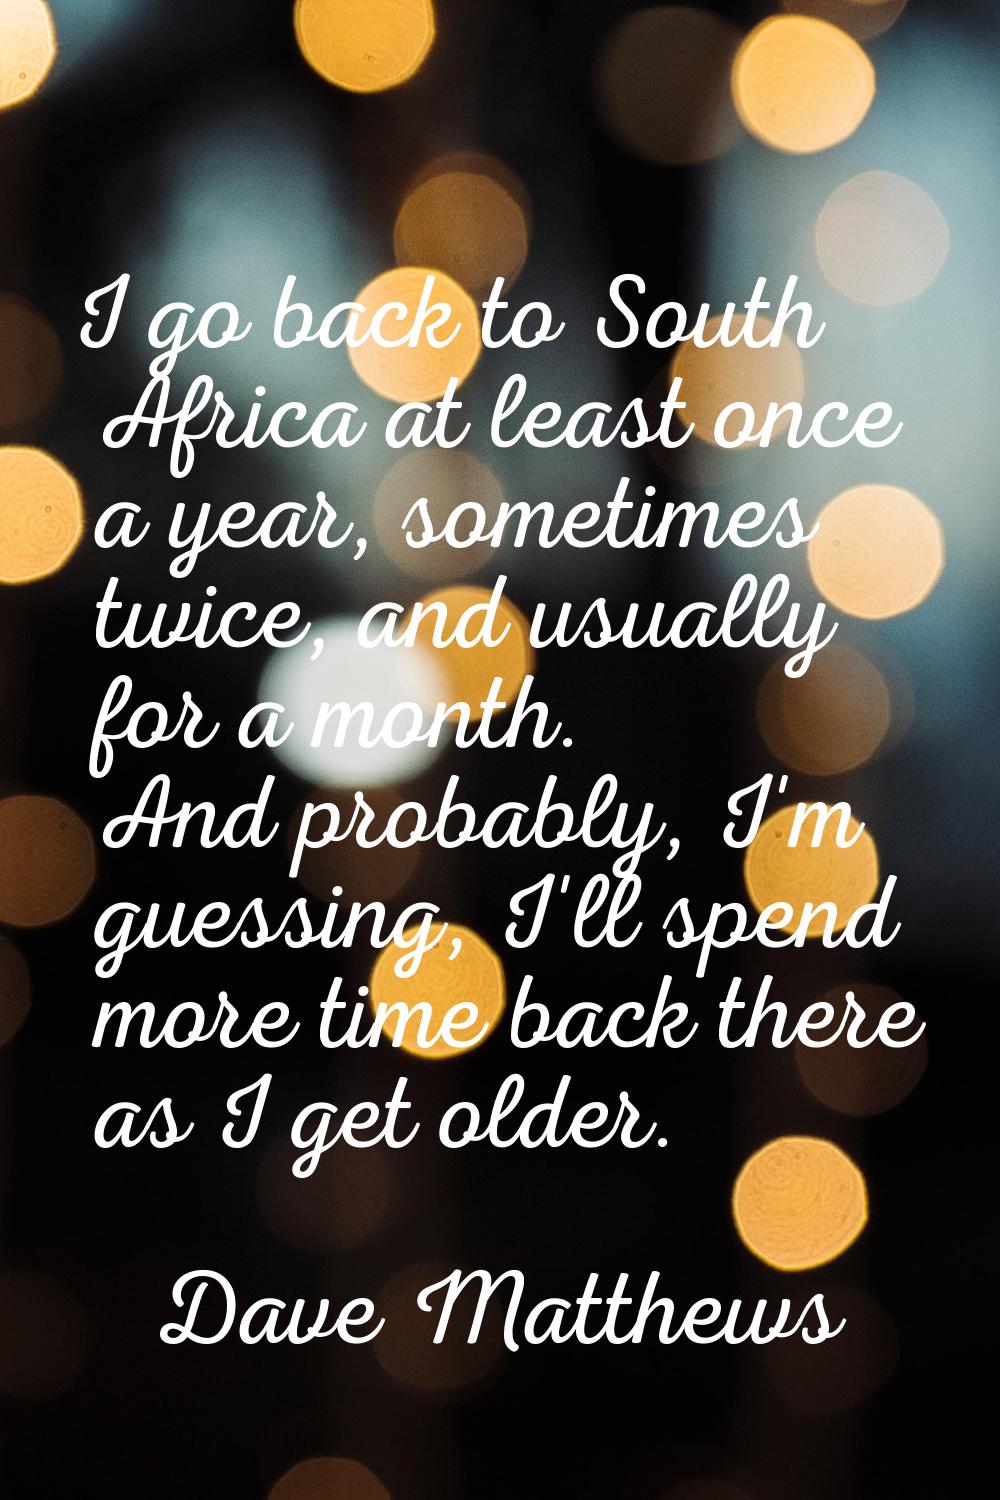 I go back to South Africa at least once a year, sometimes twice, and usually for a month. And proba